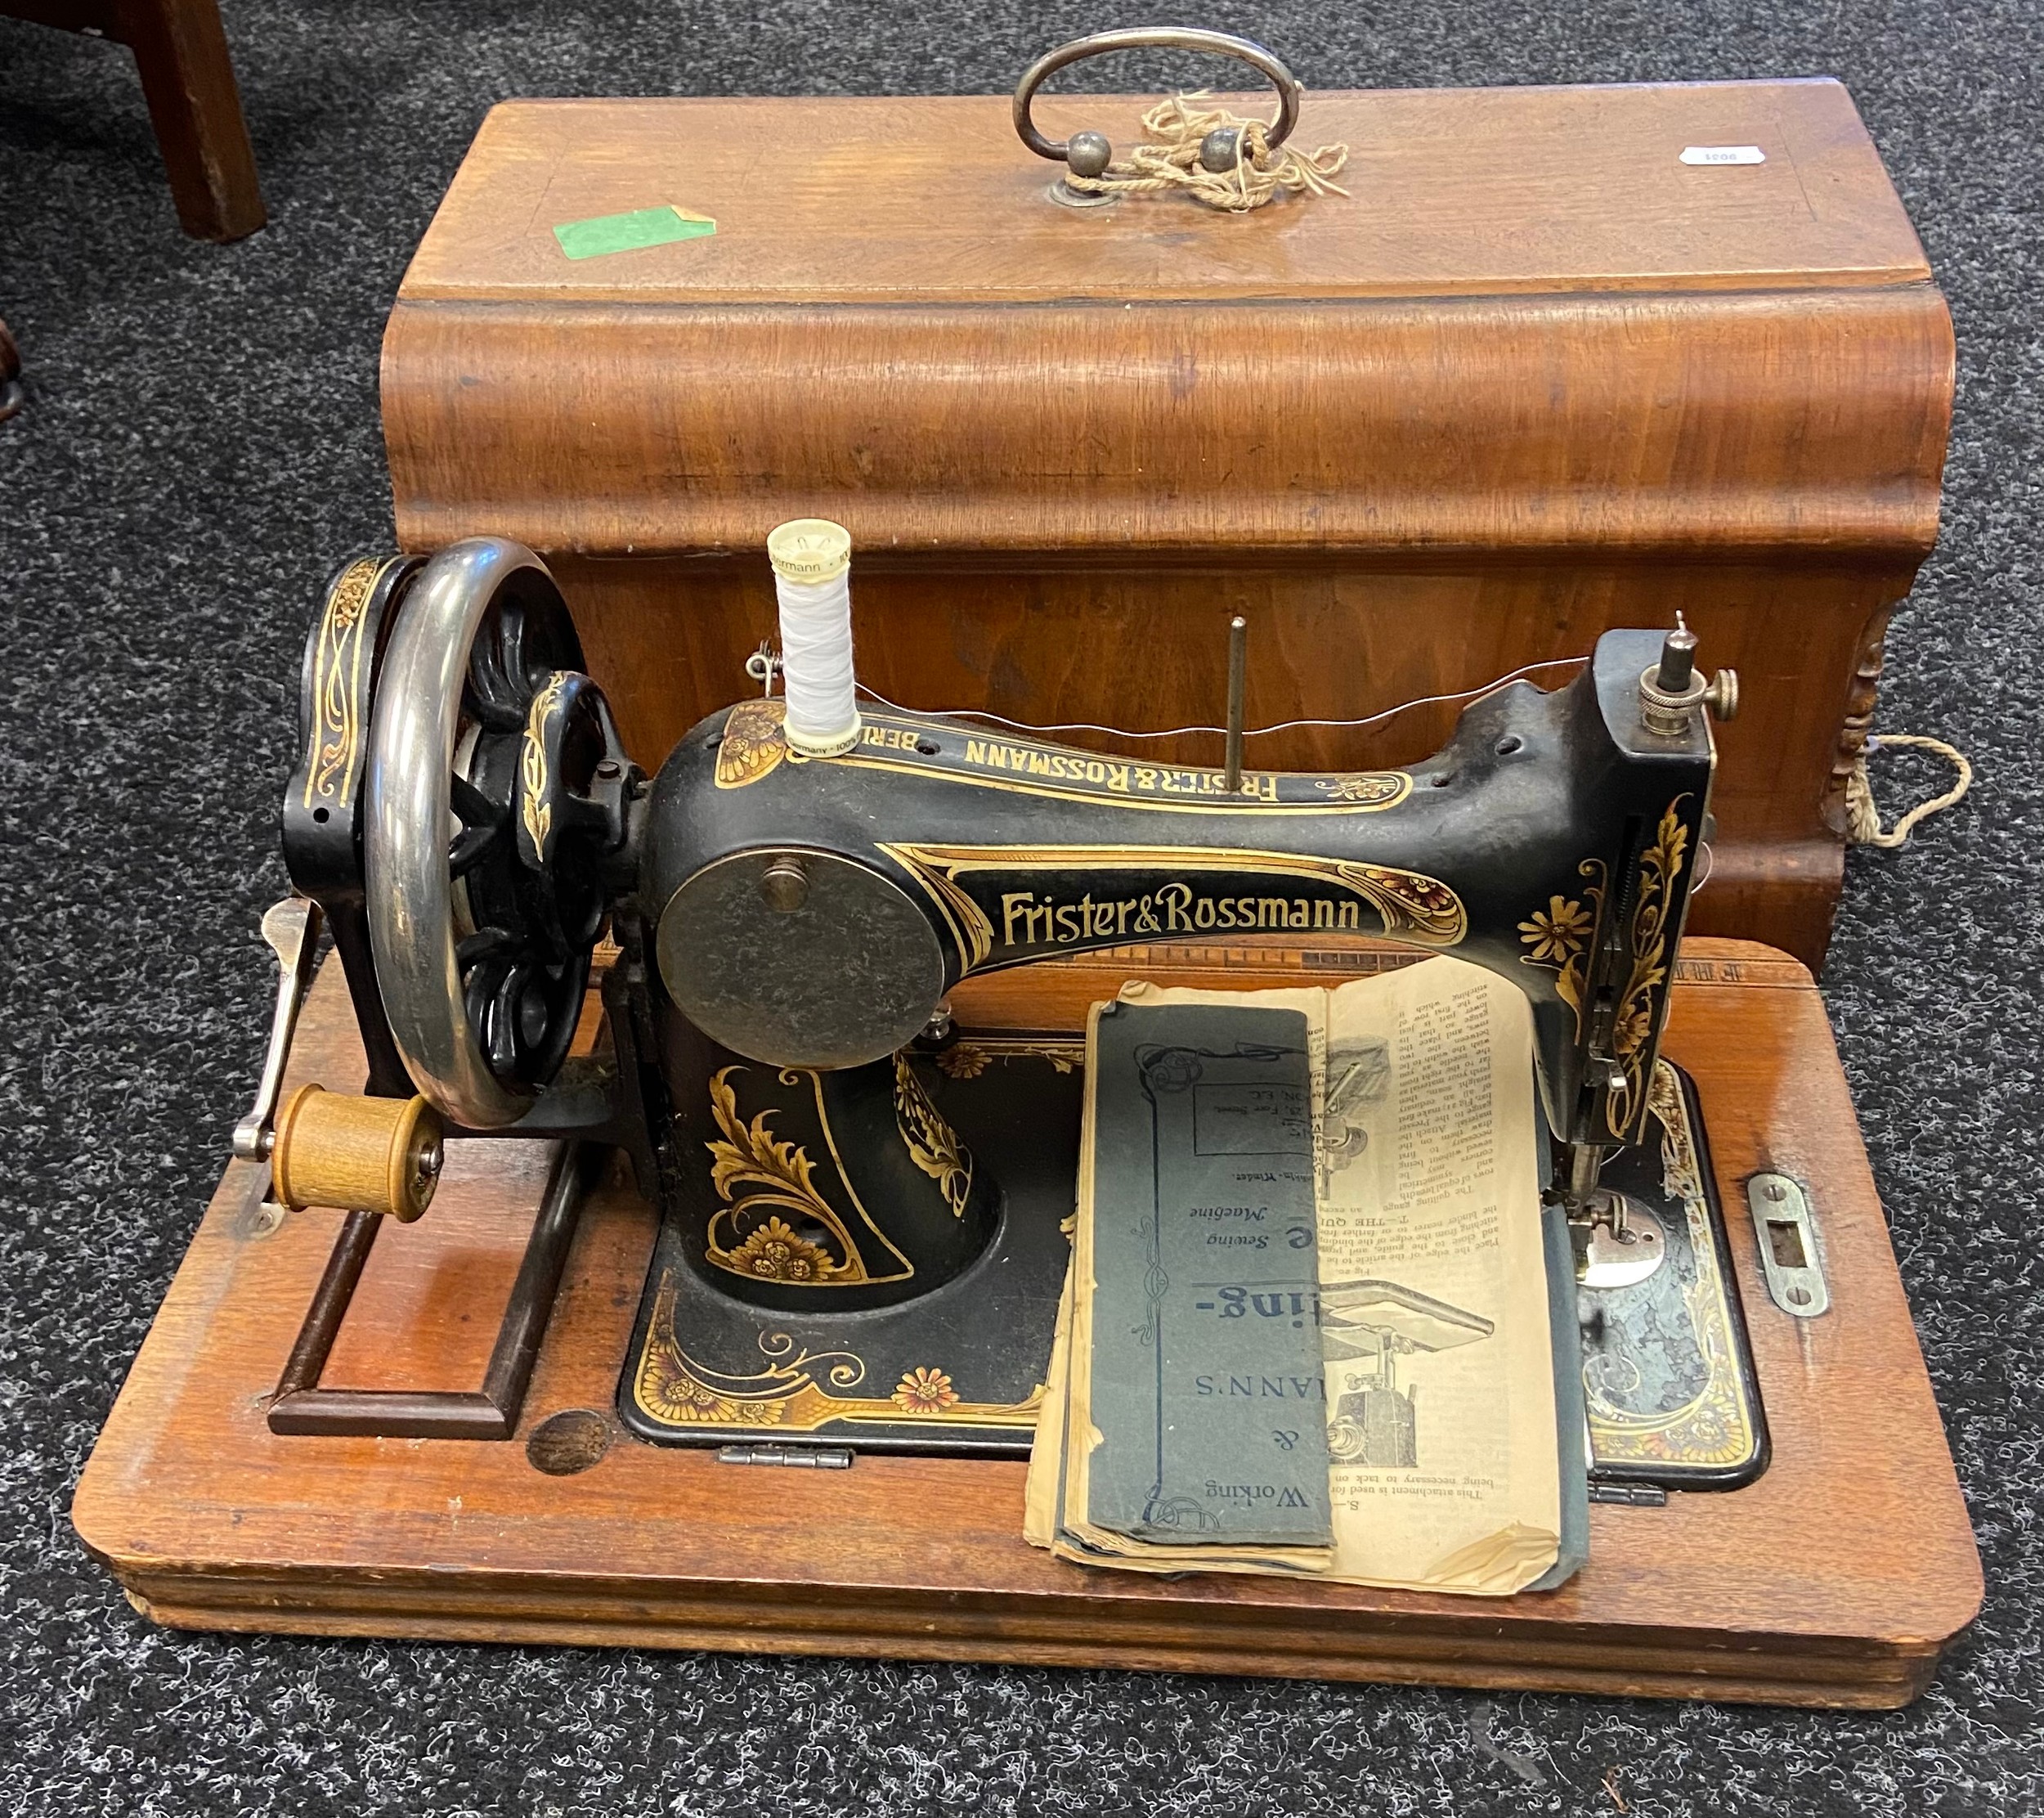 Antique sewing machine [Frister & Rossman] [1418184] - Image 3 of 3